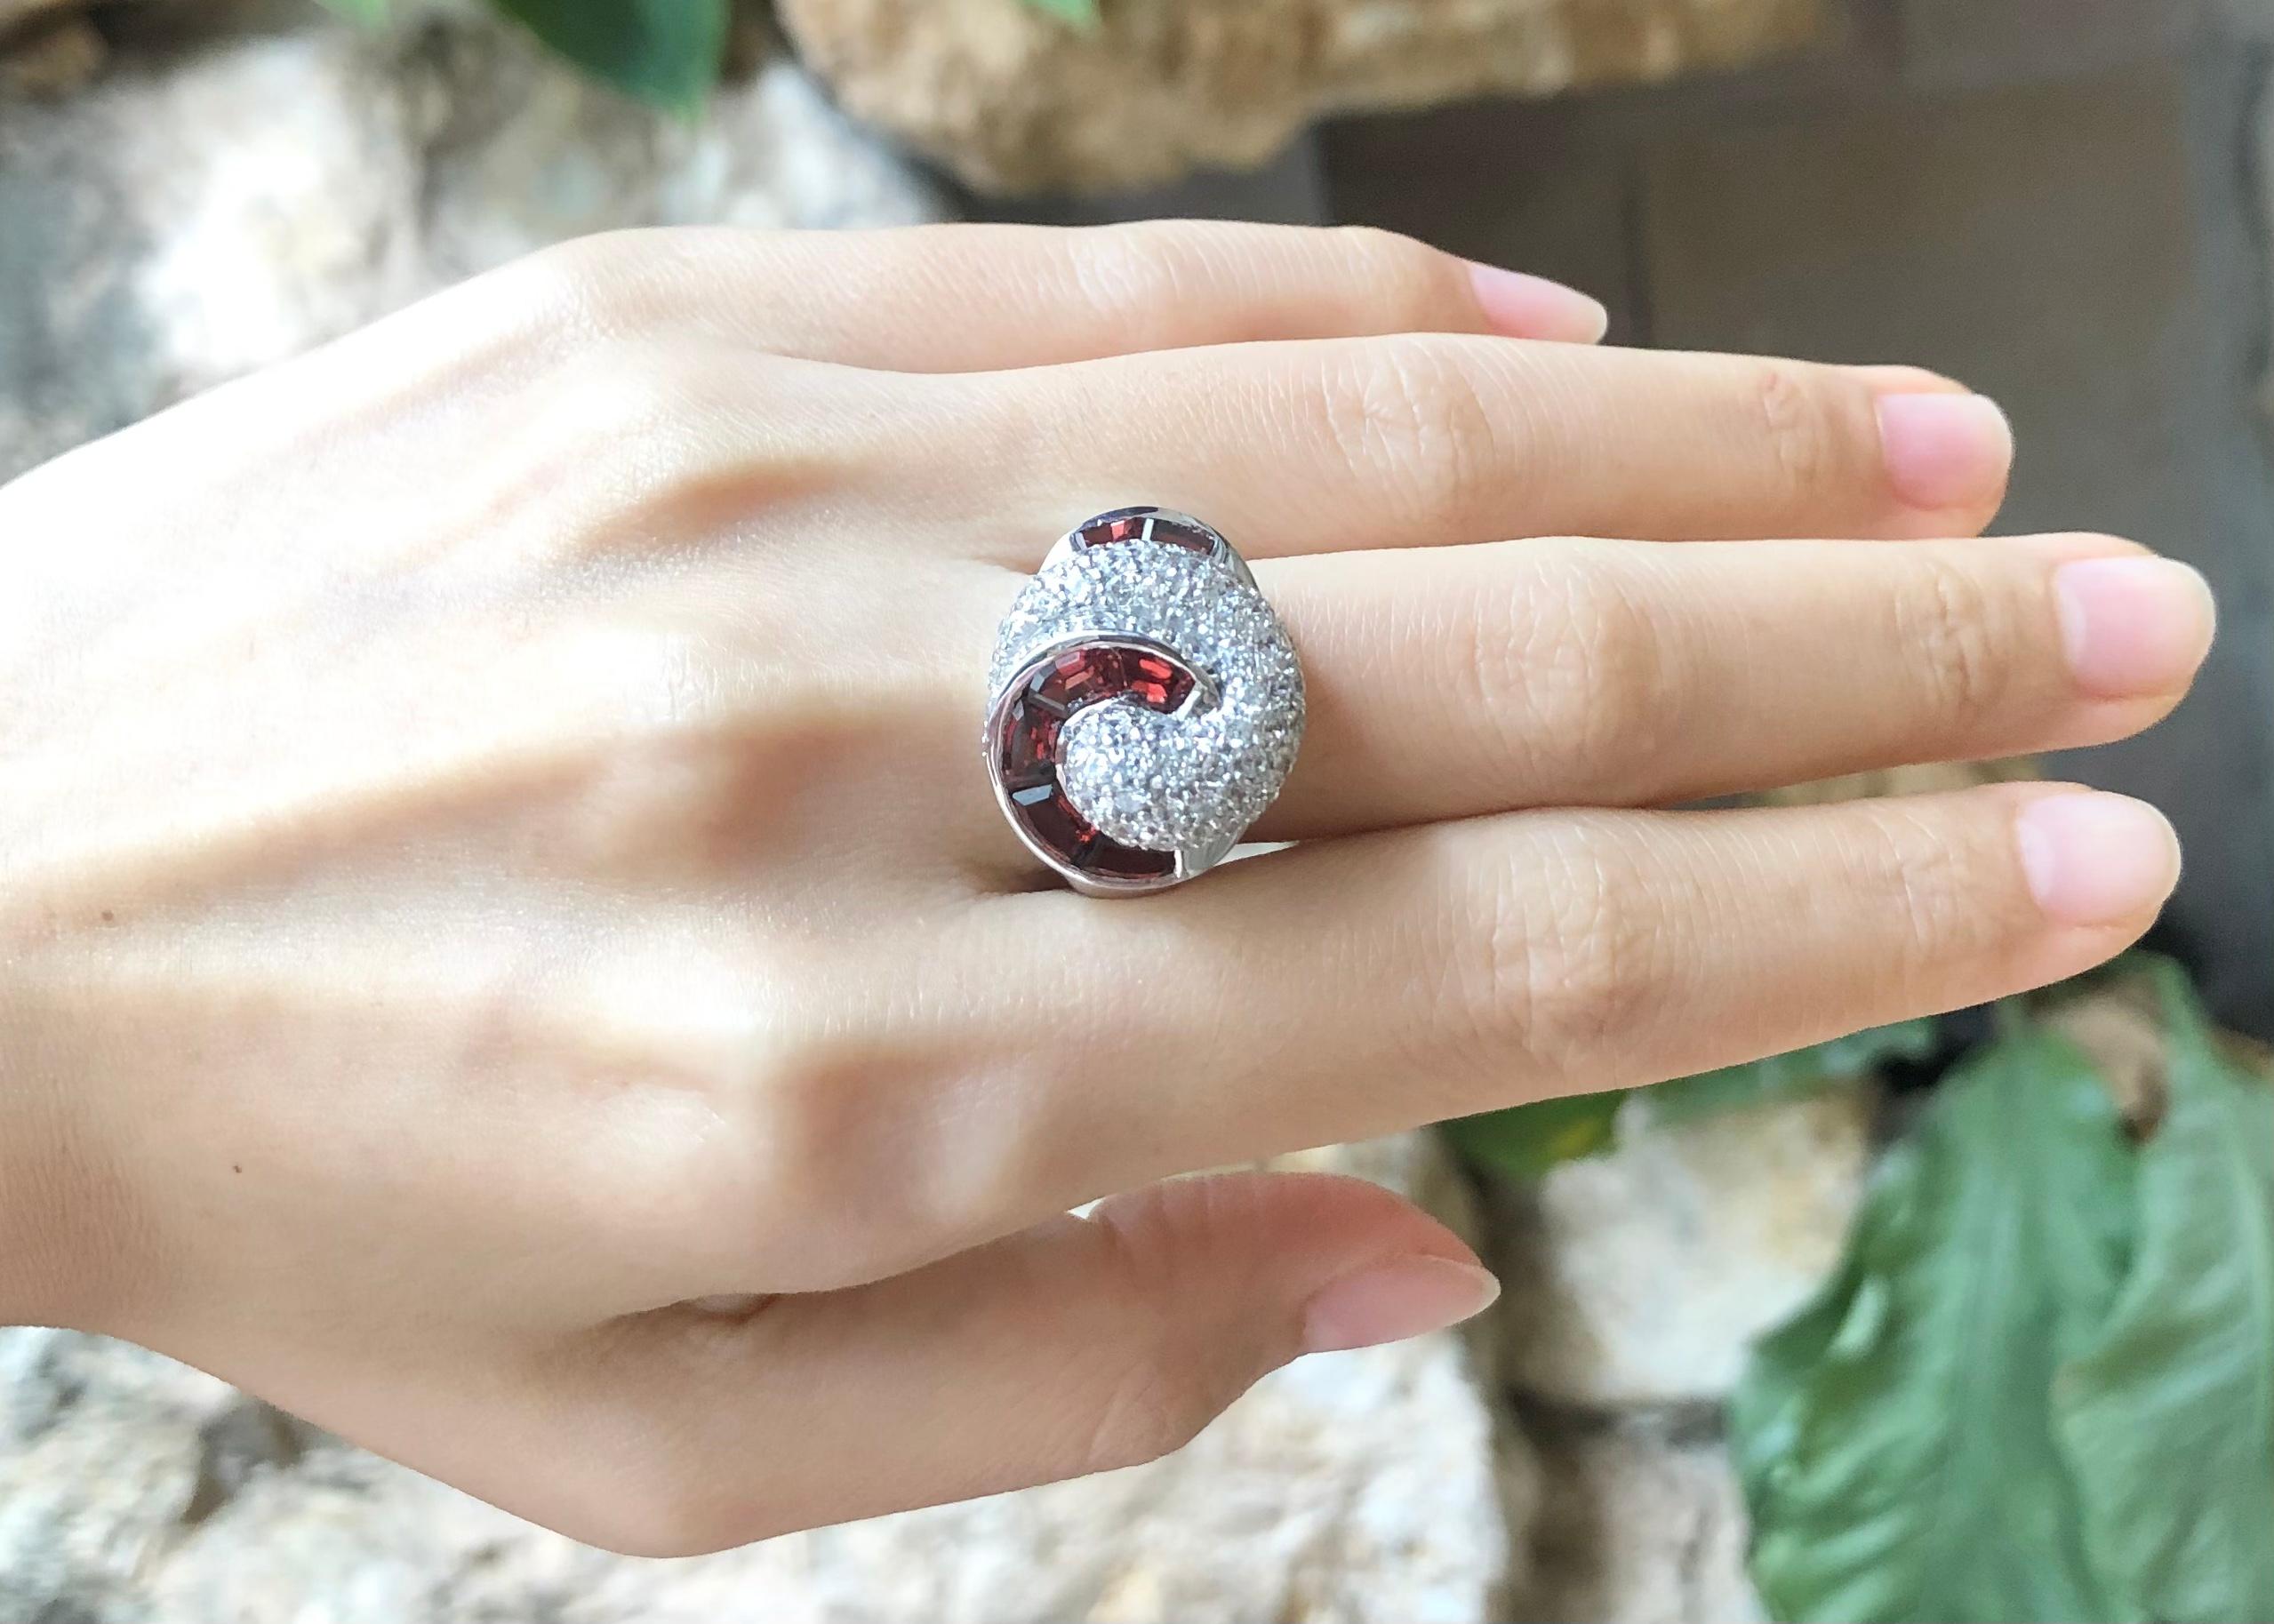 Garnet with Cubic Zirconia Ring set in Silver Settings

Width:  2.0 cm 
Length: 1.8 cm
Ring Size: 55
Total Weight: 9.42 grams

*Please note that the silver setting is plated with rhodium to promote shine and help prevent oxidation.  However, with